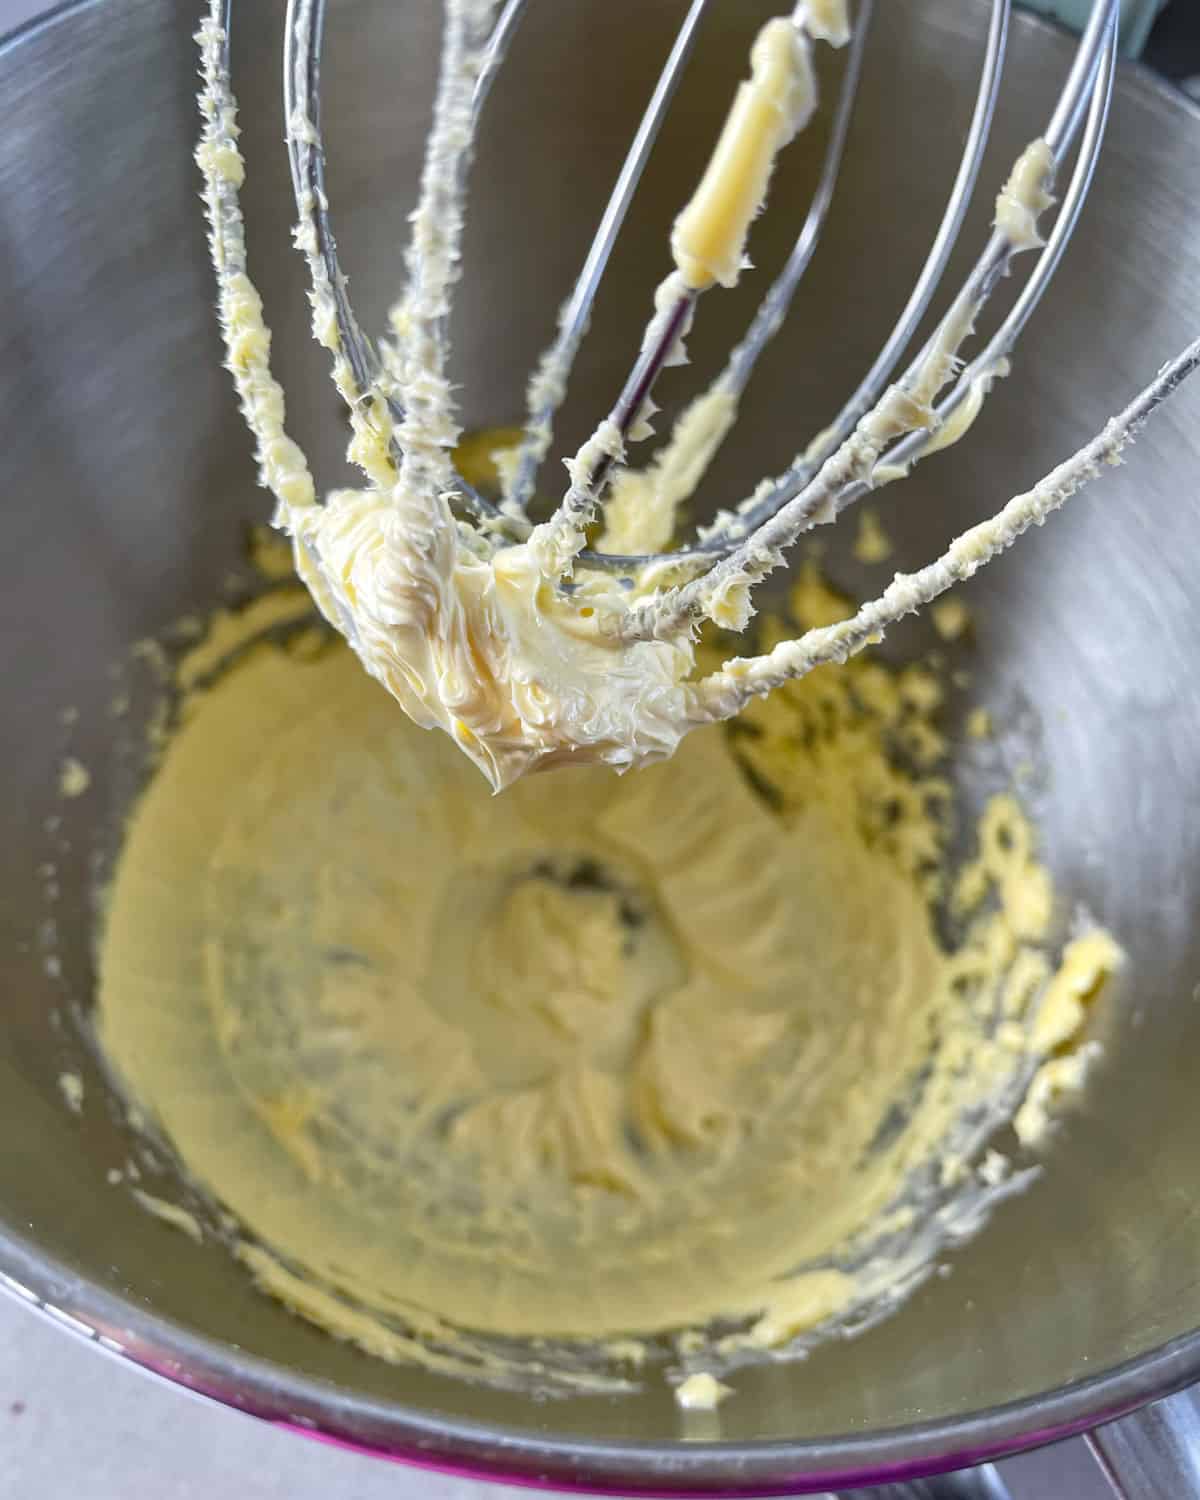 Butter being whipped in a stand mixer